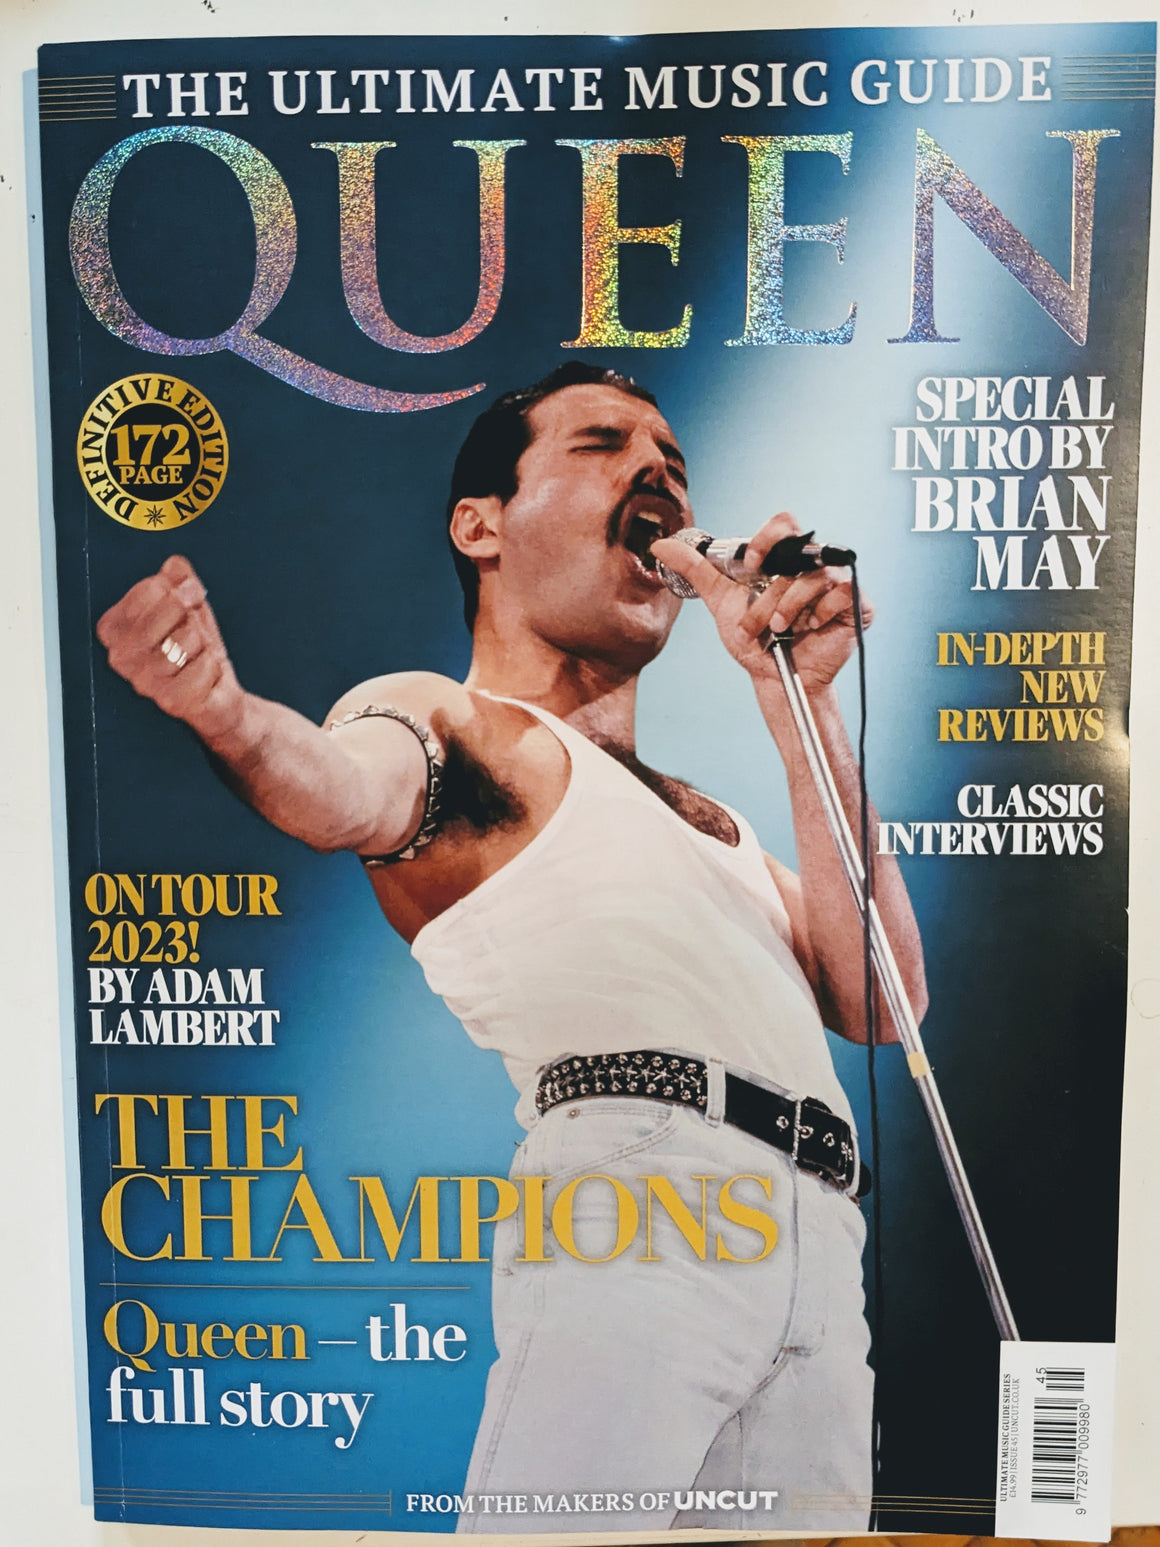 Mojo The Collector Series Queen Magazine Issue 24 The Works 1970-1979